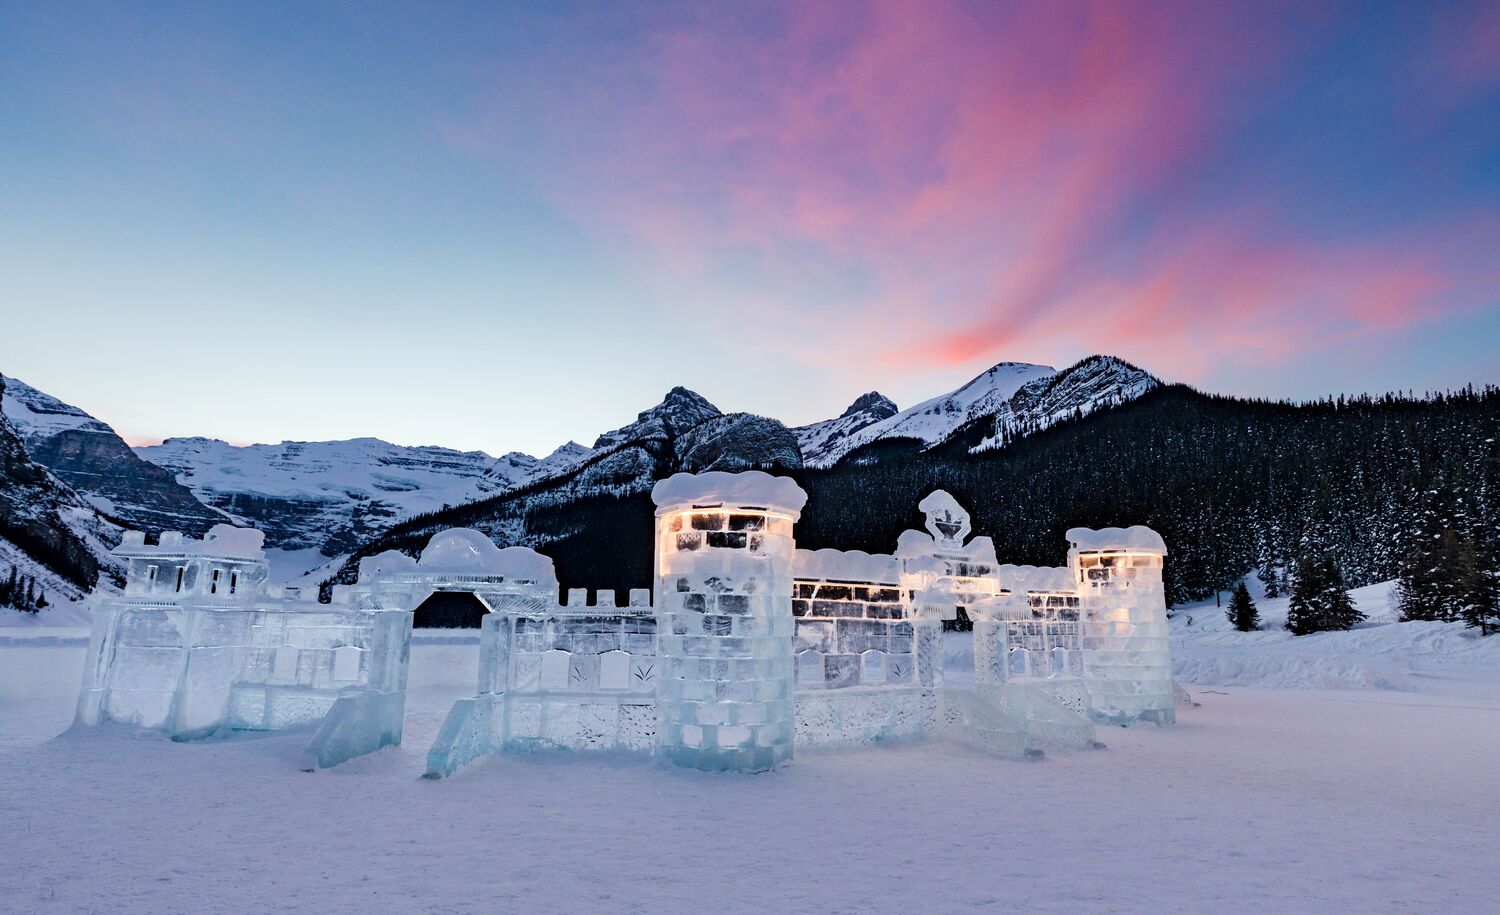 The ice castle at Lake Louise in Banff National Park.